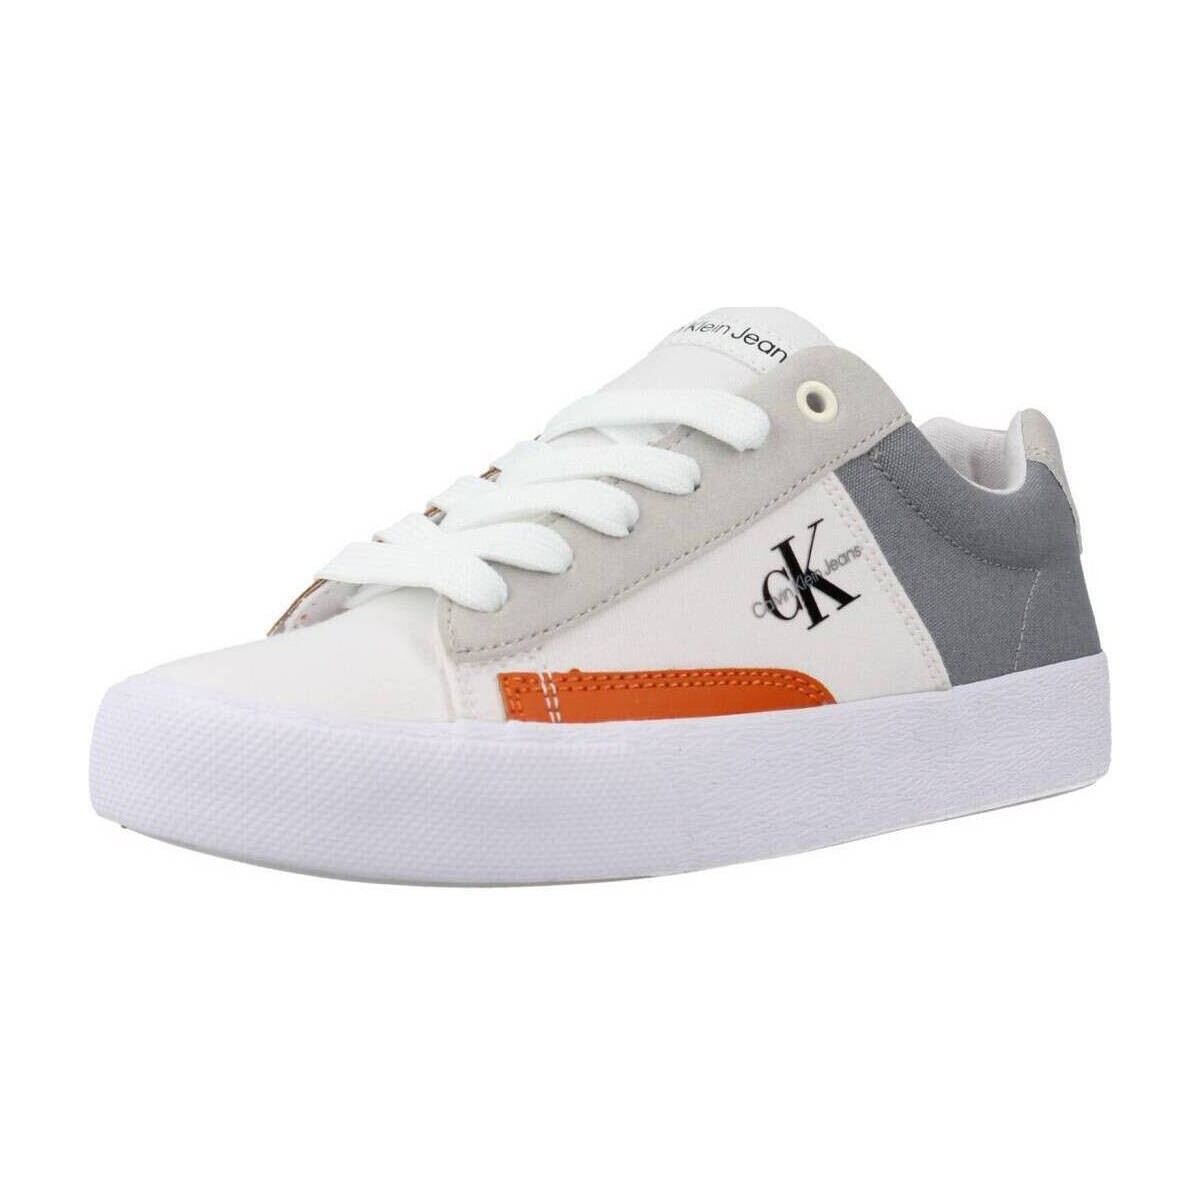 Chaussures Fille Baskets basses Calvin Klein Jeans V3X980564 Blanc